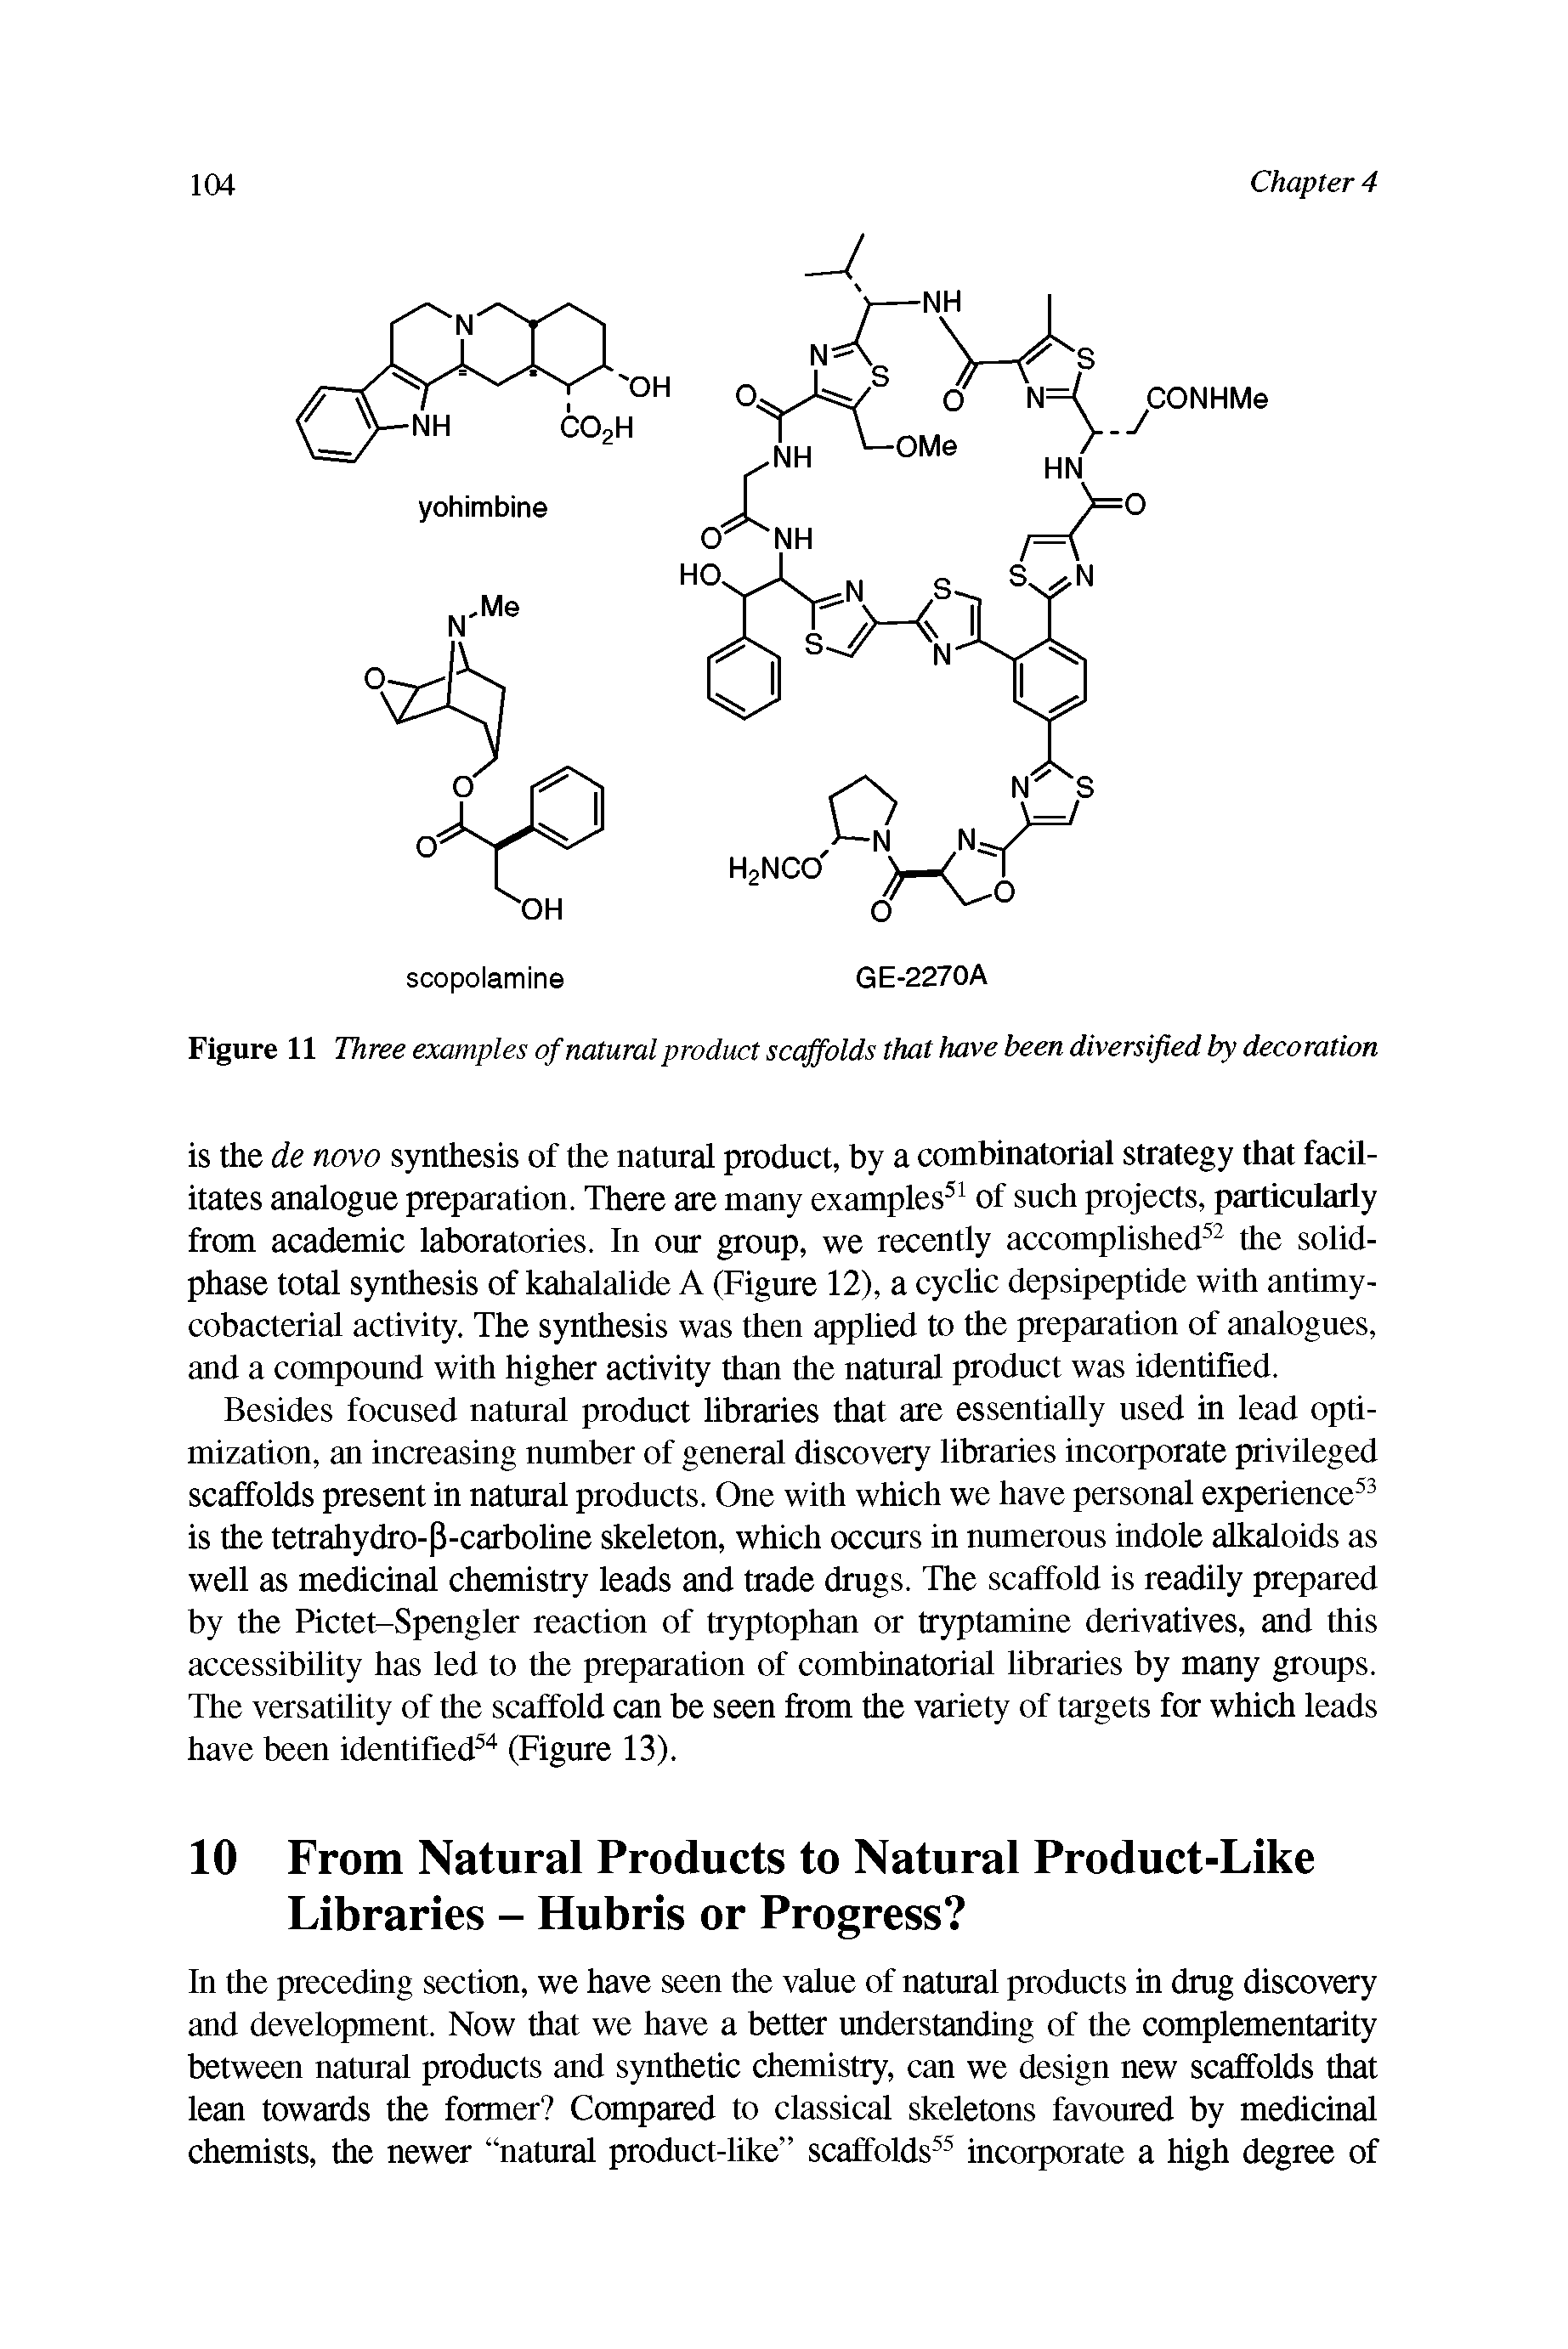 Figure 11 Three examples of natural product scaffolds that have been diversified by decoration...